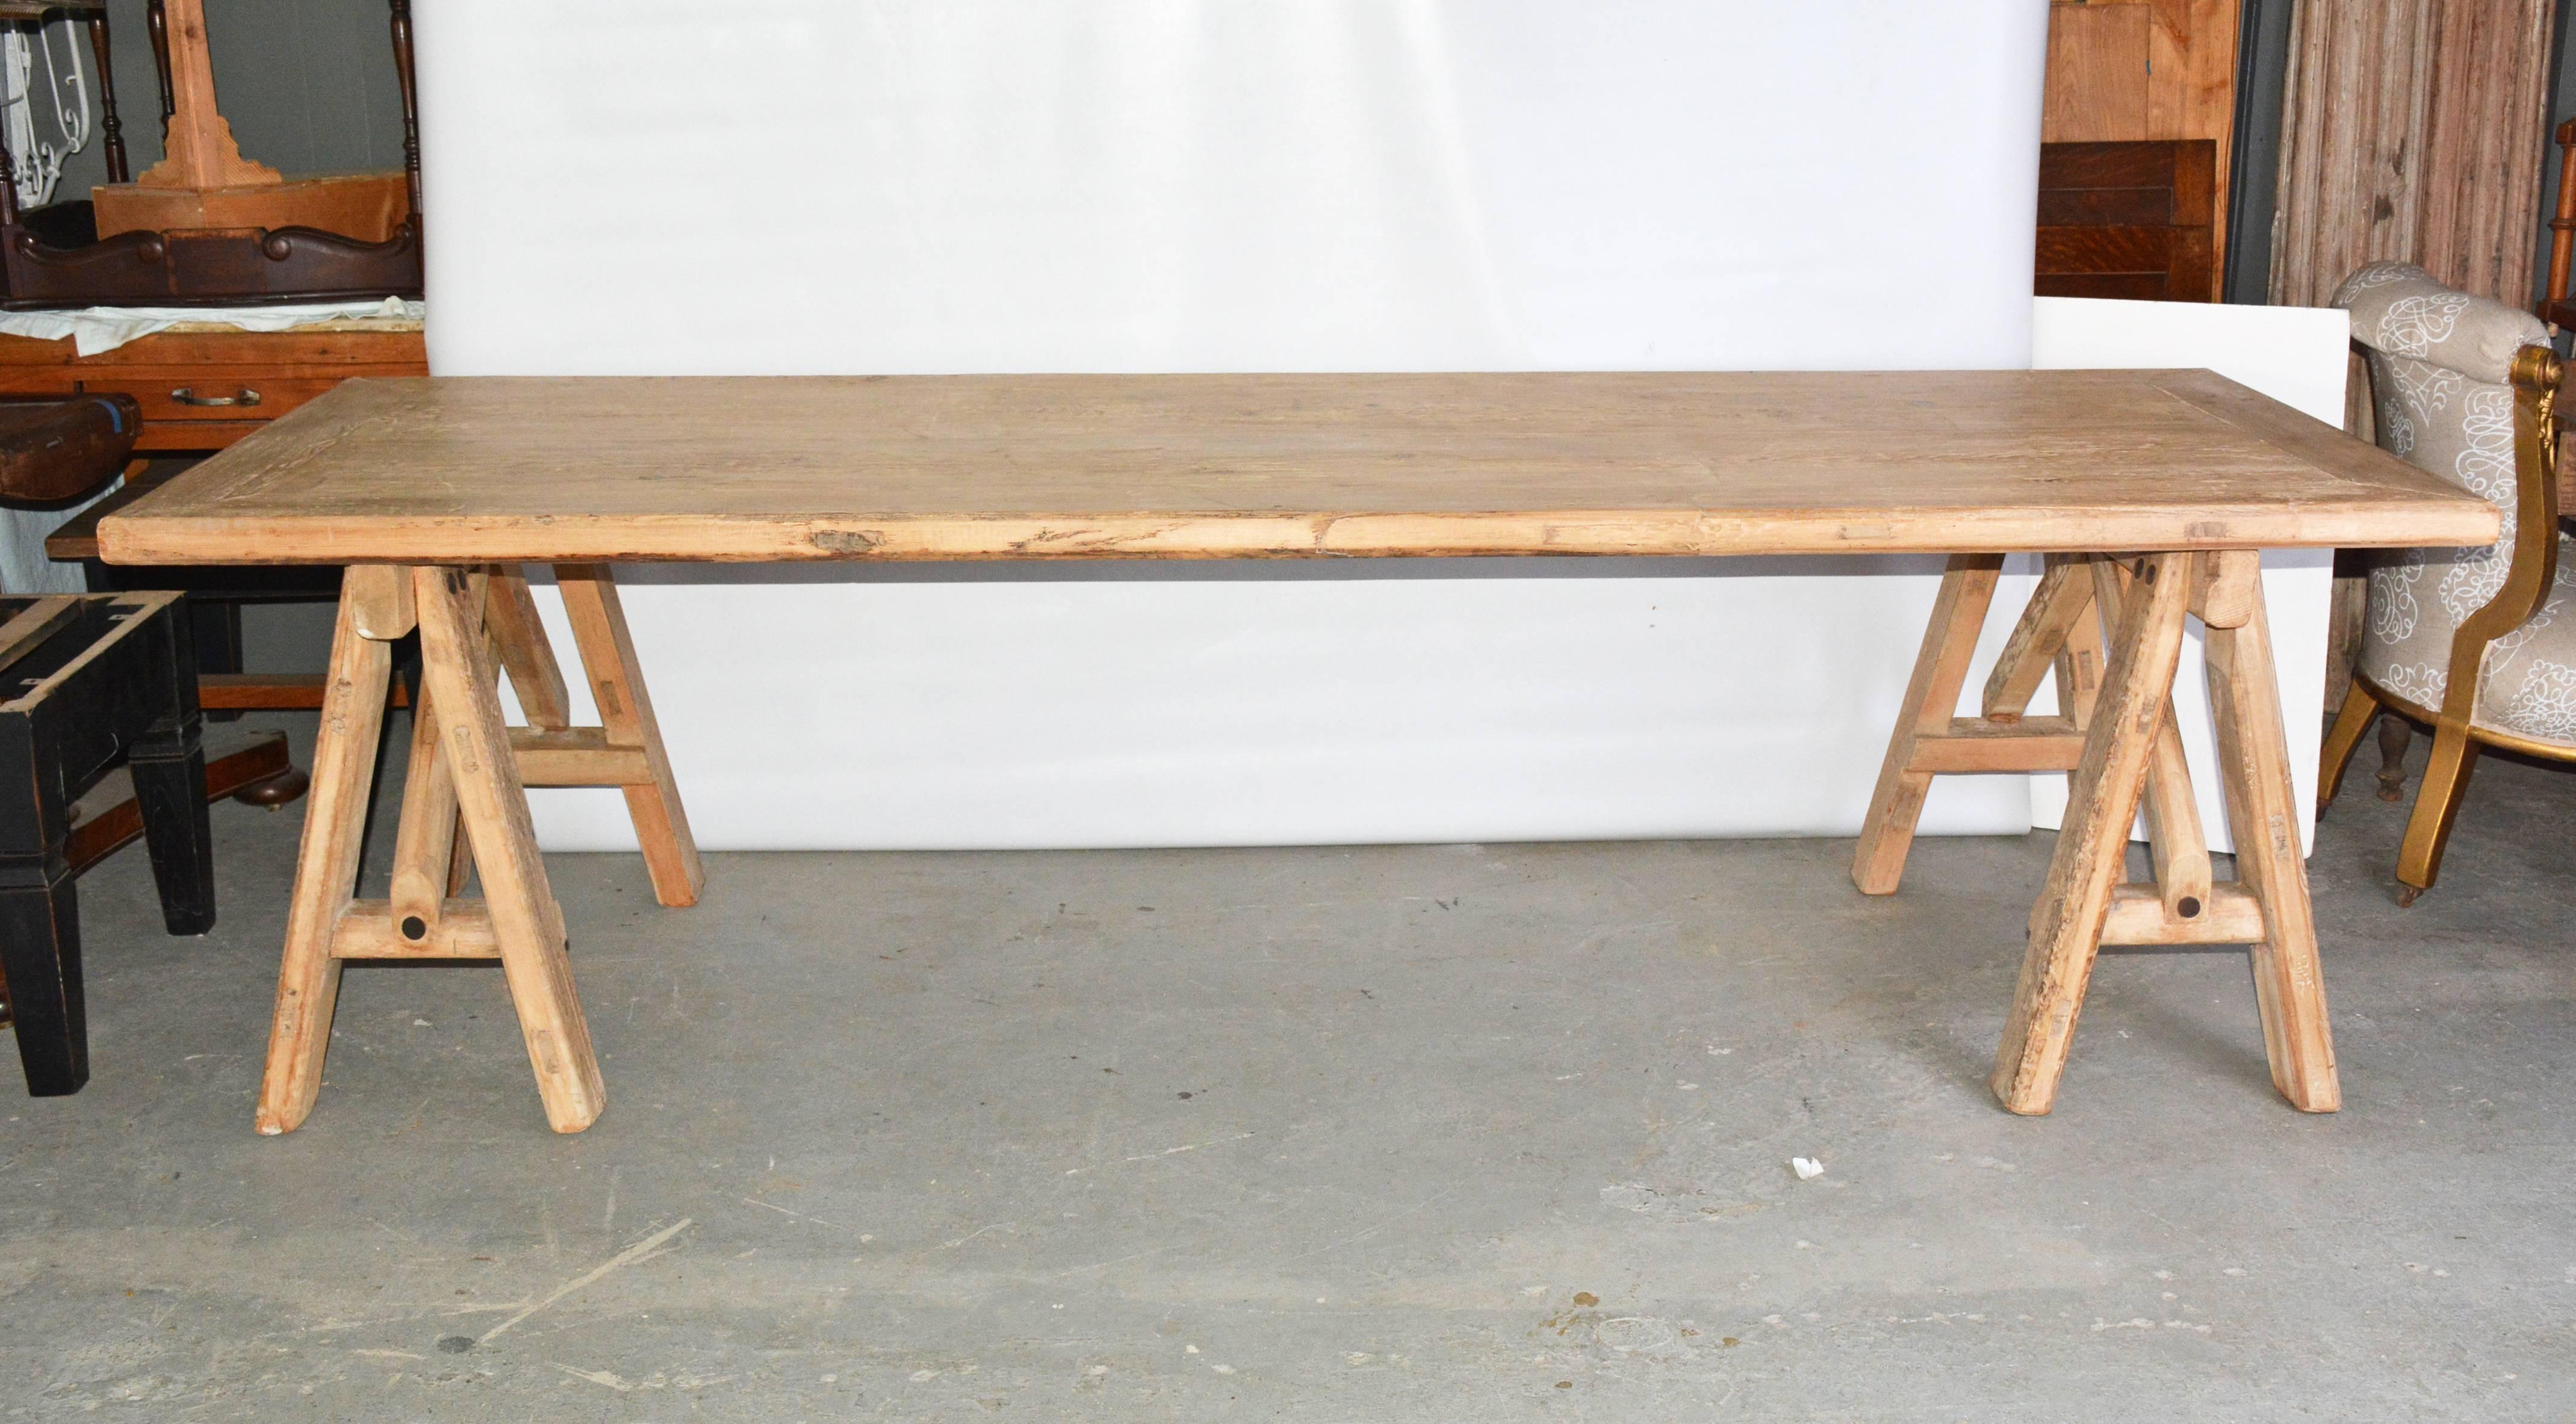 The rustic sawhorse dining table seats up to ten with framed planks. The sawhorse legs are secured with stretchers and angled supports. Newly made from reclaimed wood.